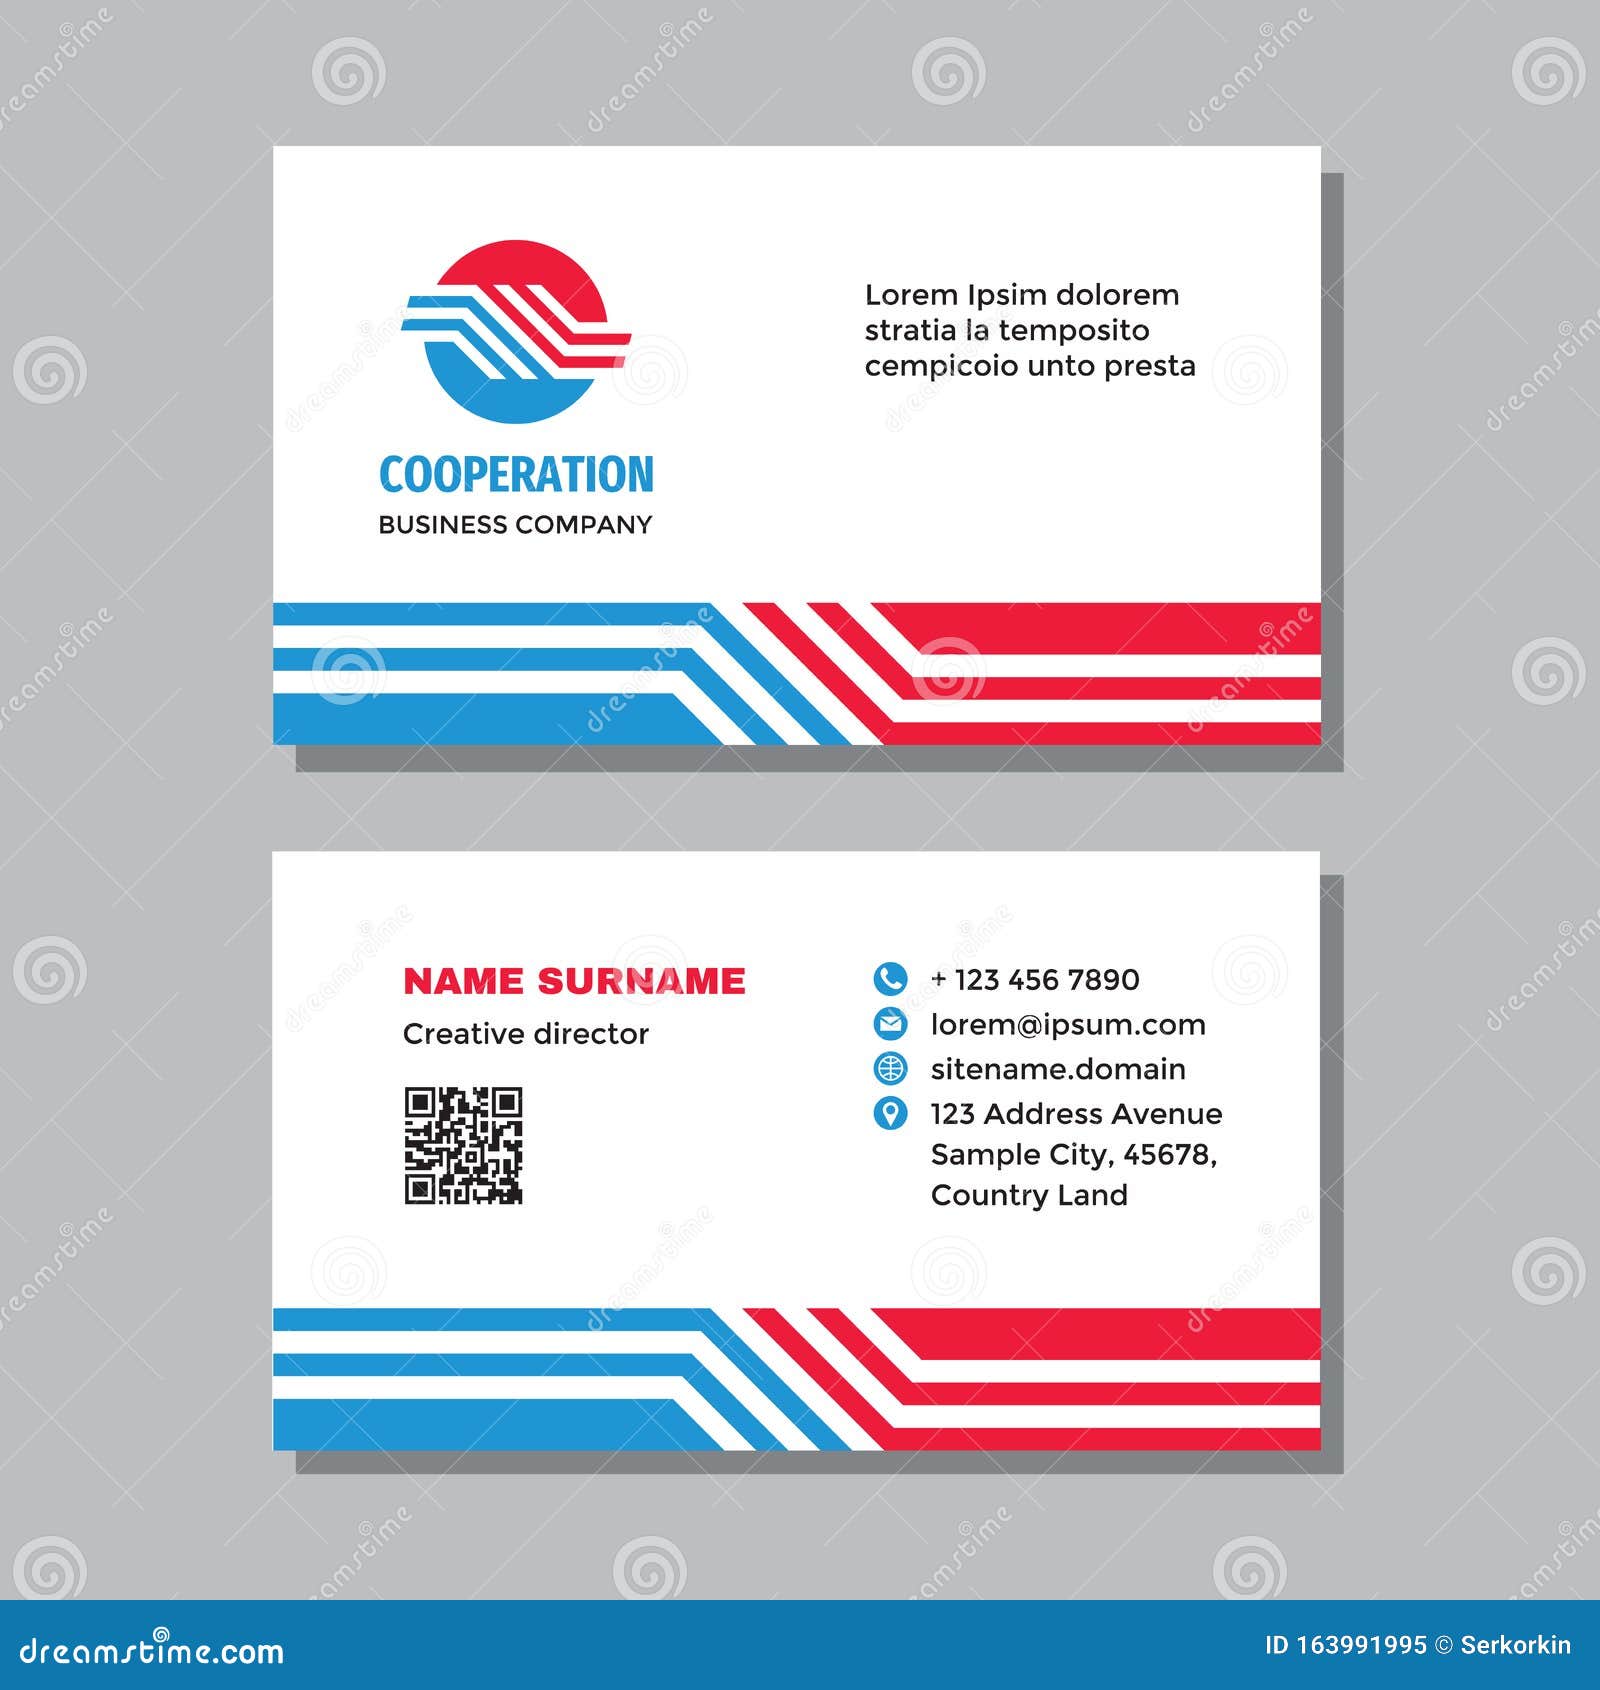 Business Card Template with Logo - Concept Design. Computer Within Networking Card Template